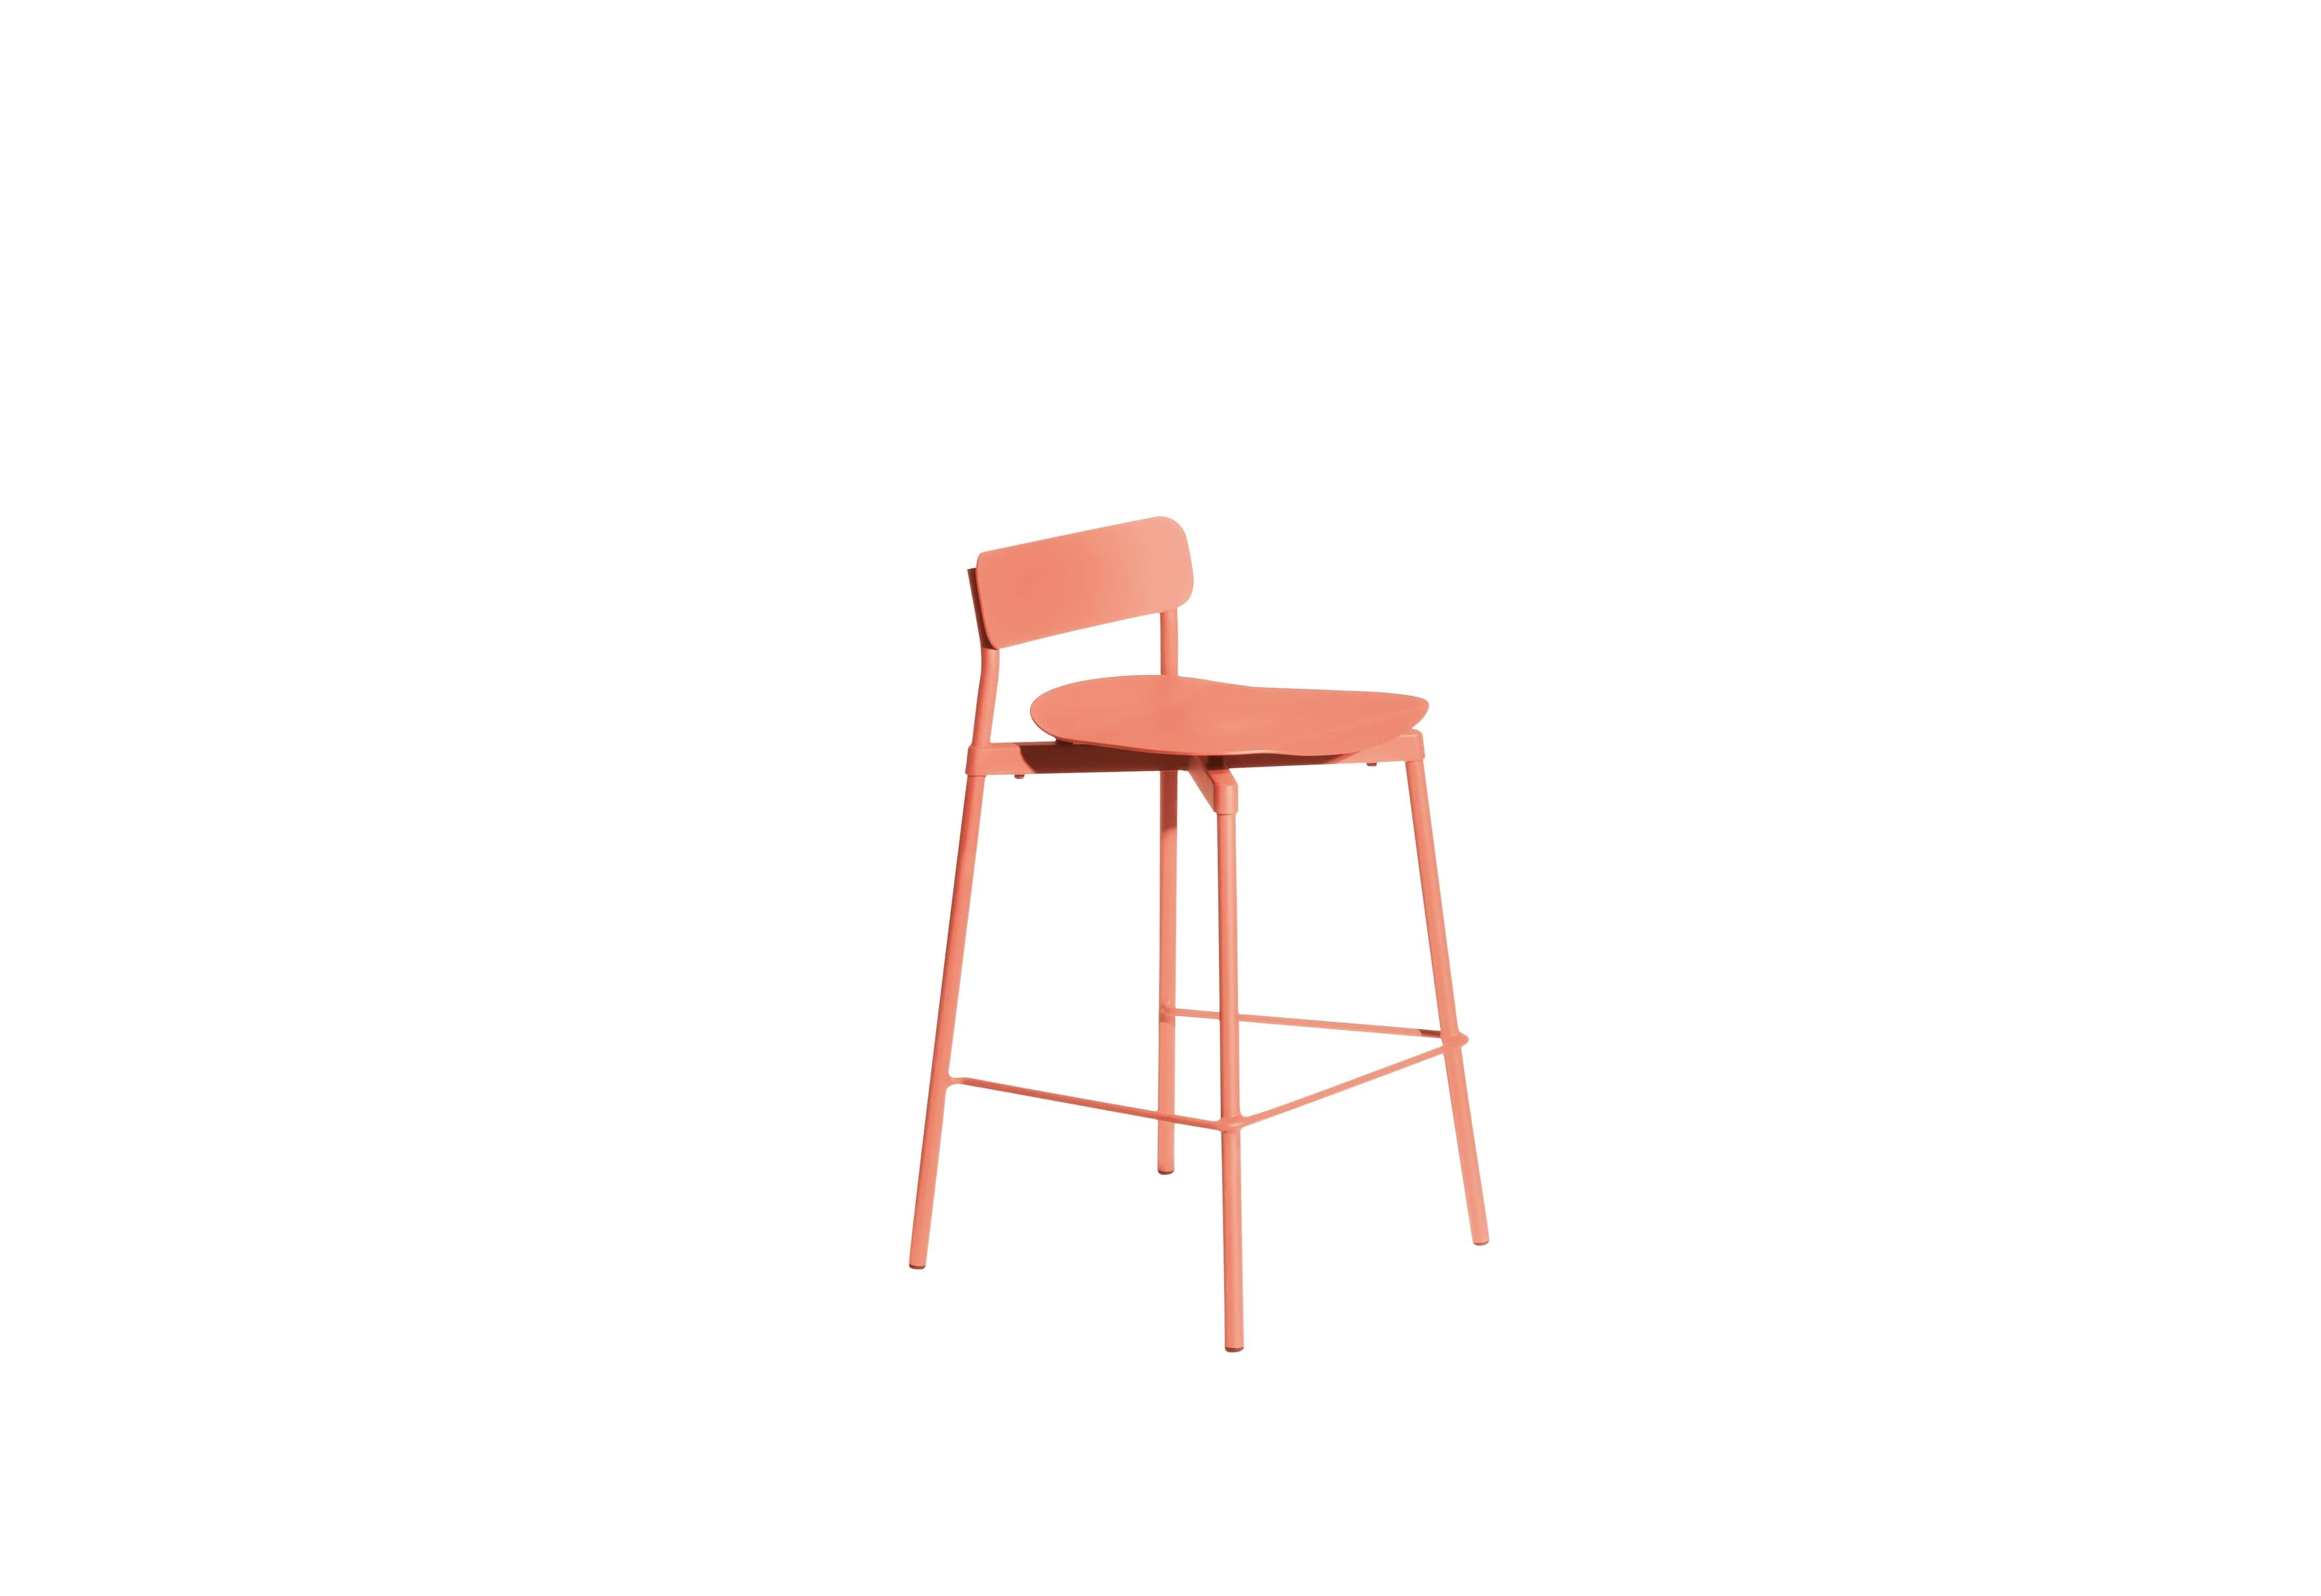 Petite Friture Small Fromme Bar stool in Coral Aluminium by Tom Chung, 2020

The Fromme collection stands out by its pure line and compact design. Absorbers placed under the seating gives a soft and very comfortable flexibility to seats. Made from